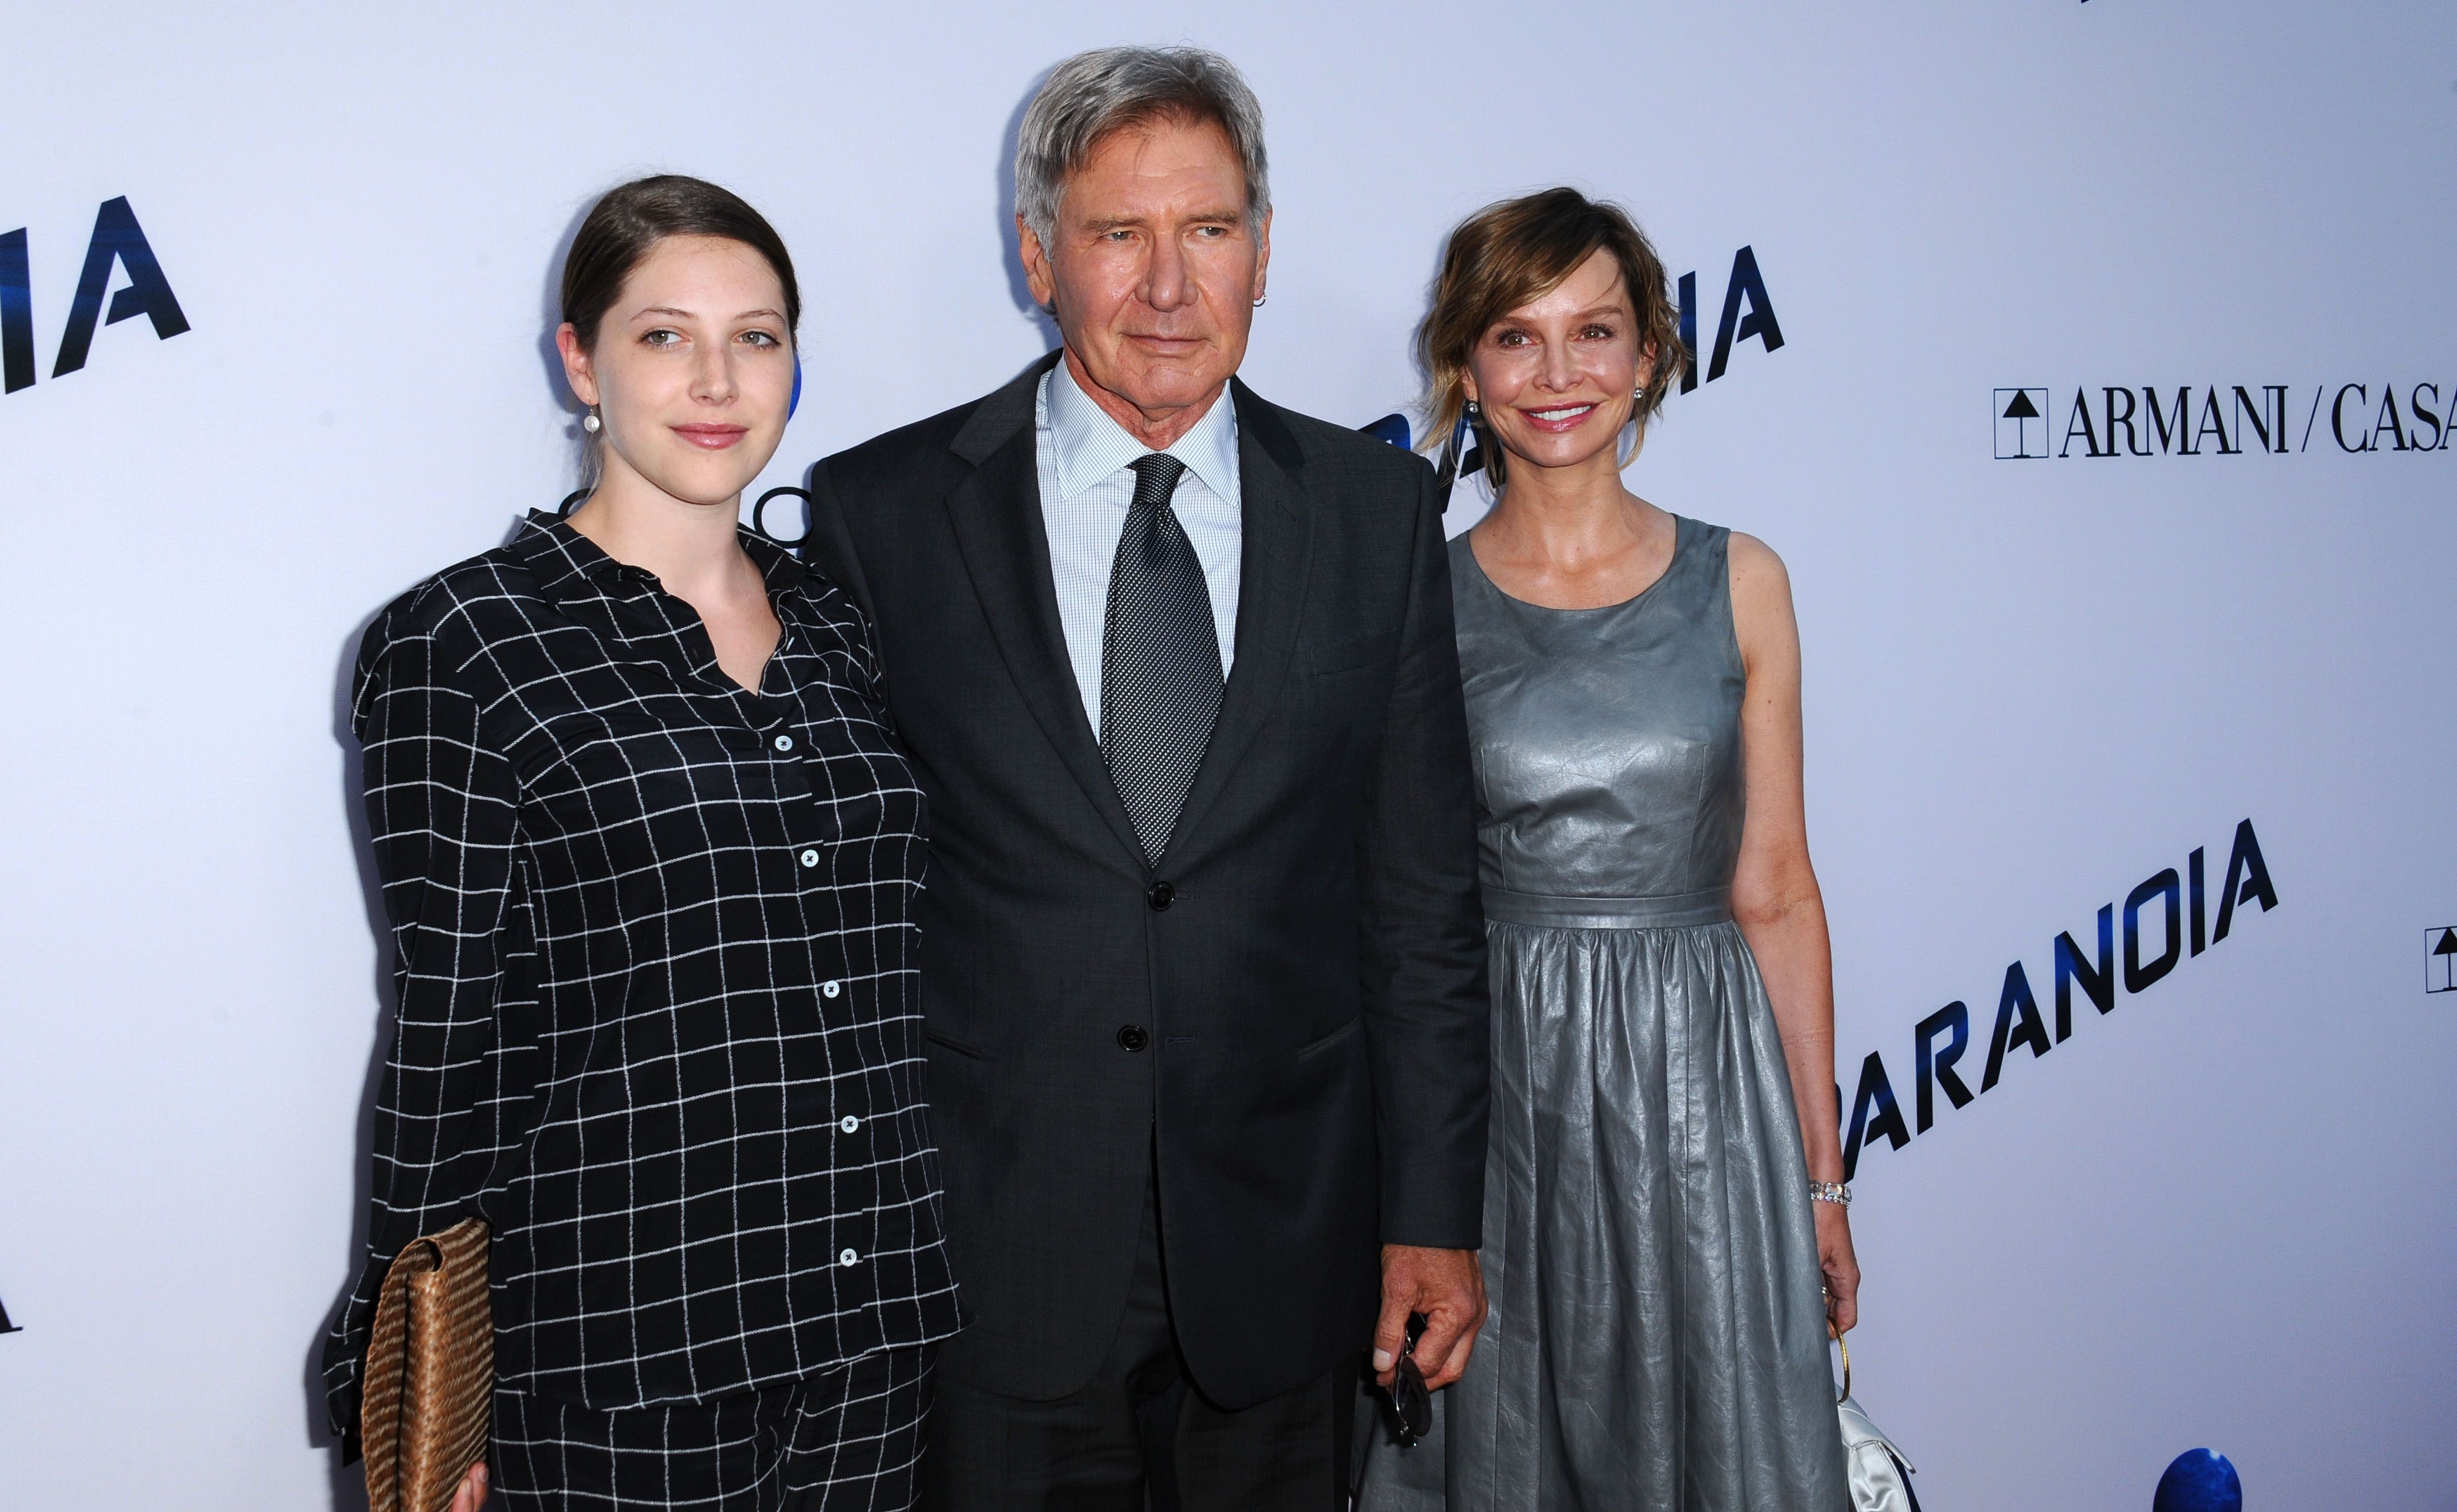 Did Harrison Ford have any children with Melissa Mathison?